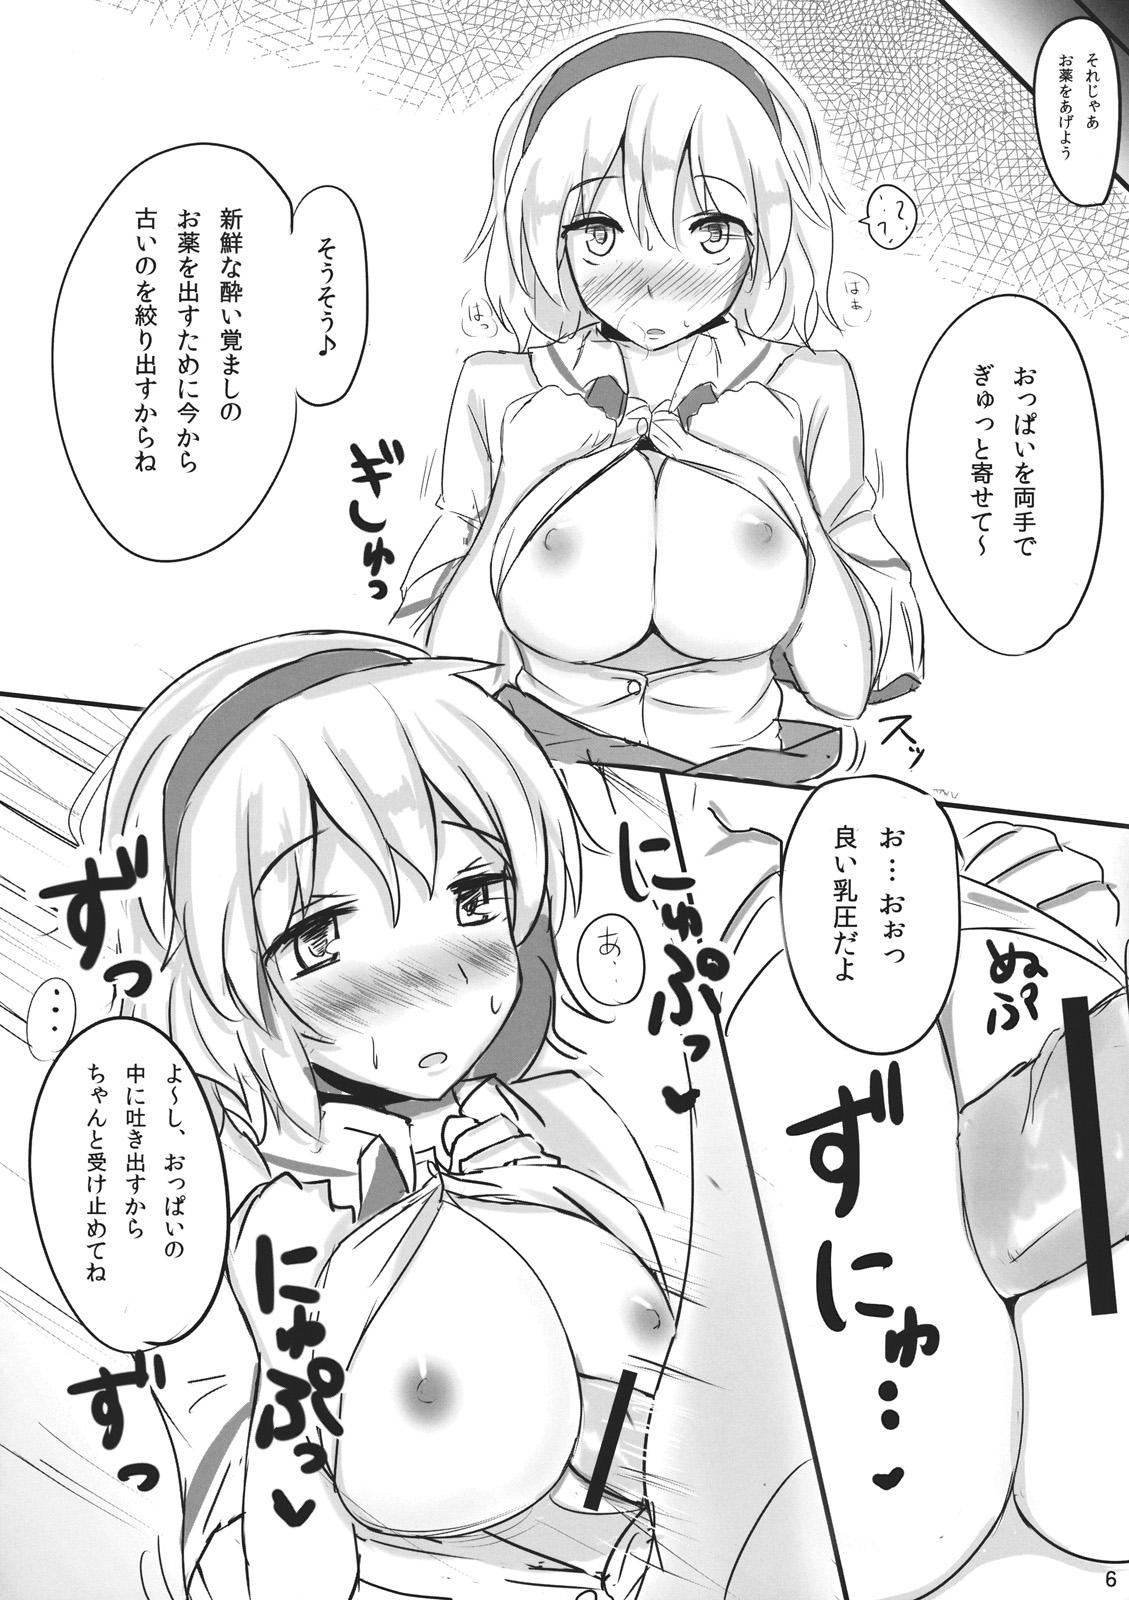 Audition Nanairo Syndrome - Touhou project Gays - Page 6